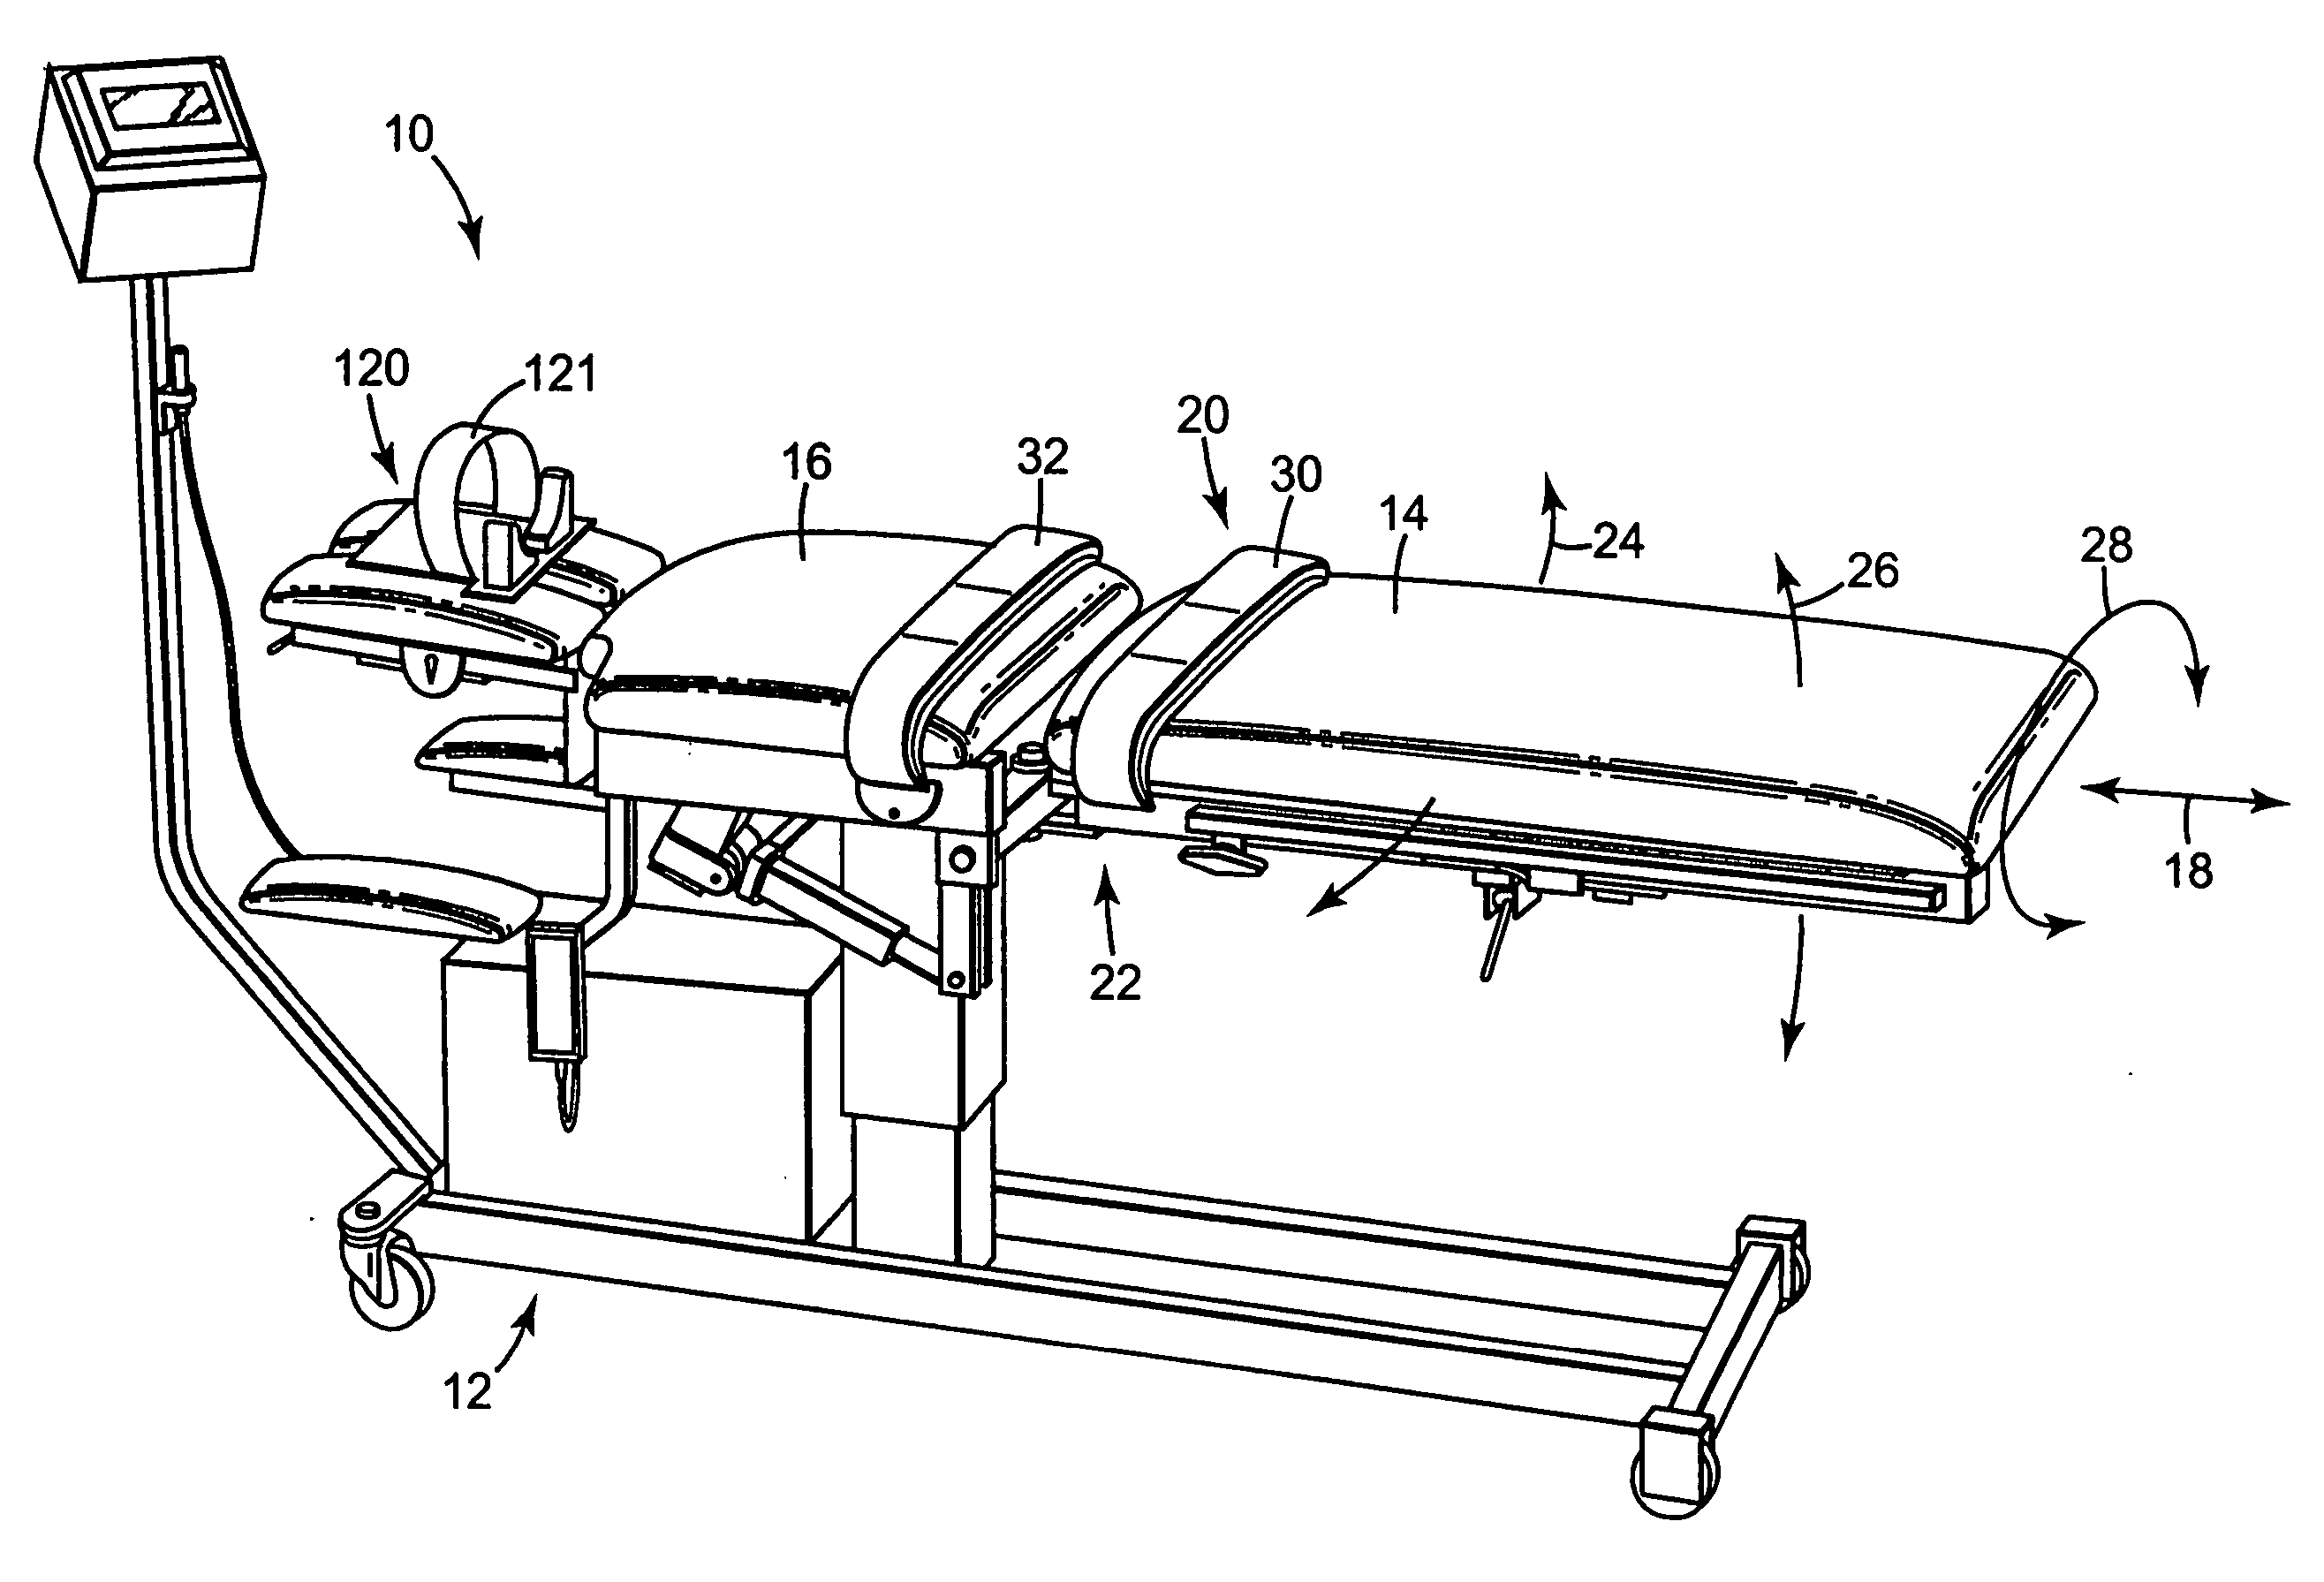 Multi-axis cervical and lumbar traction table